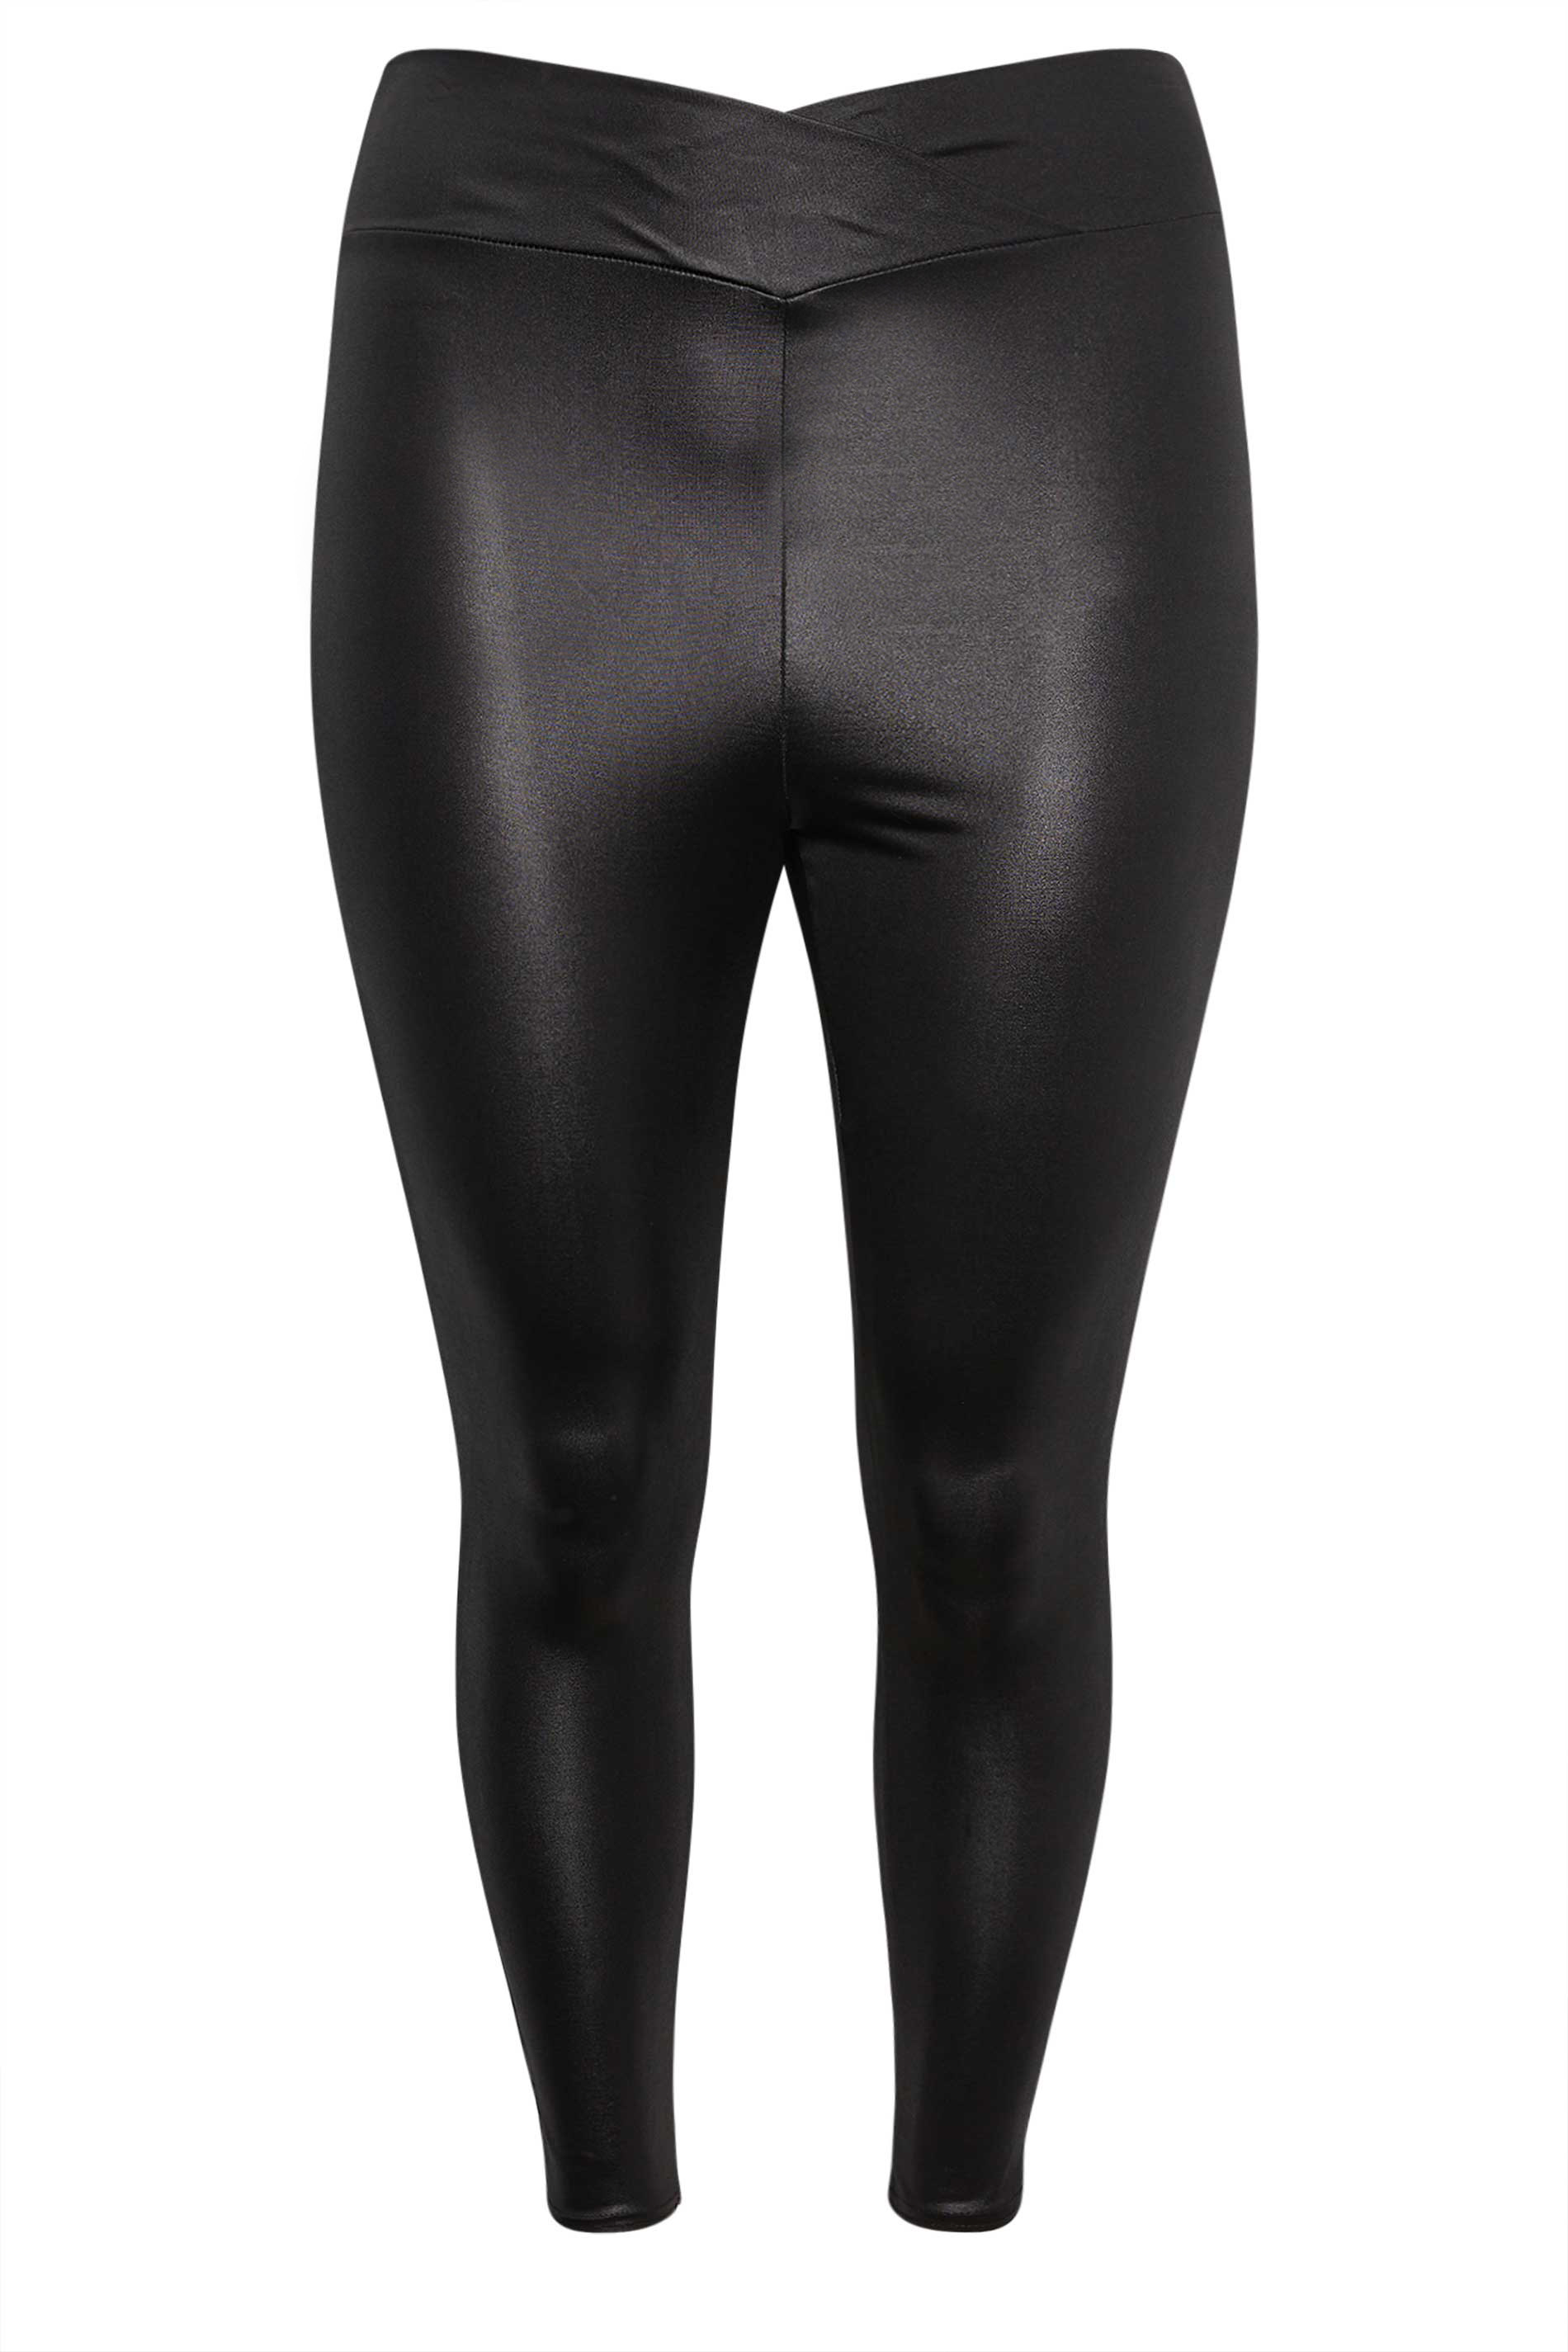 LIMITED COLLECTION Plus Size Black Faux Leather Trousers